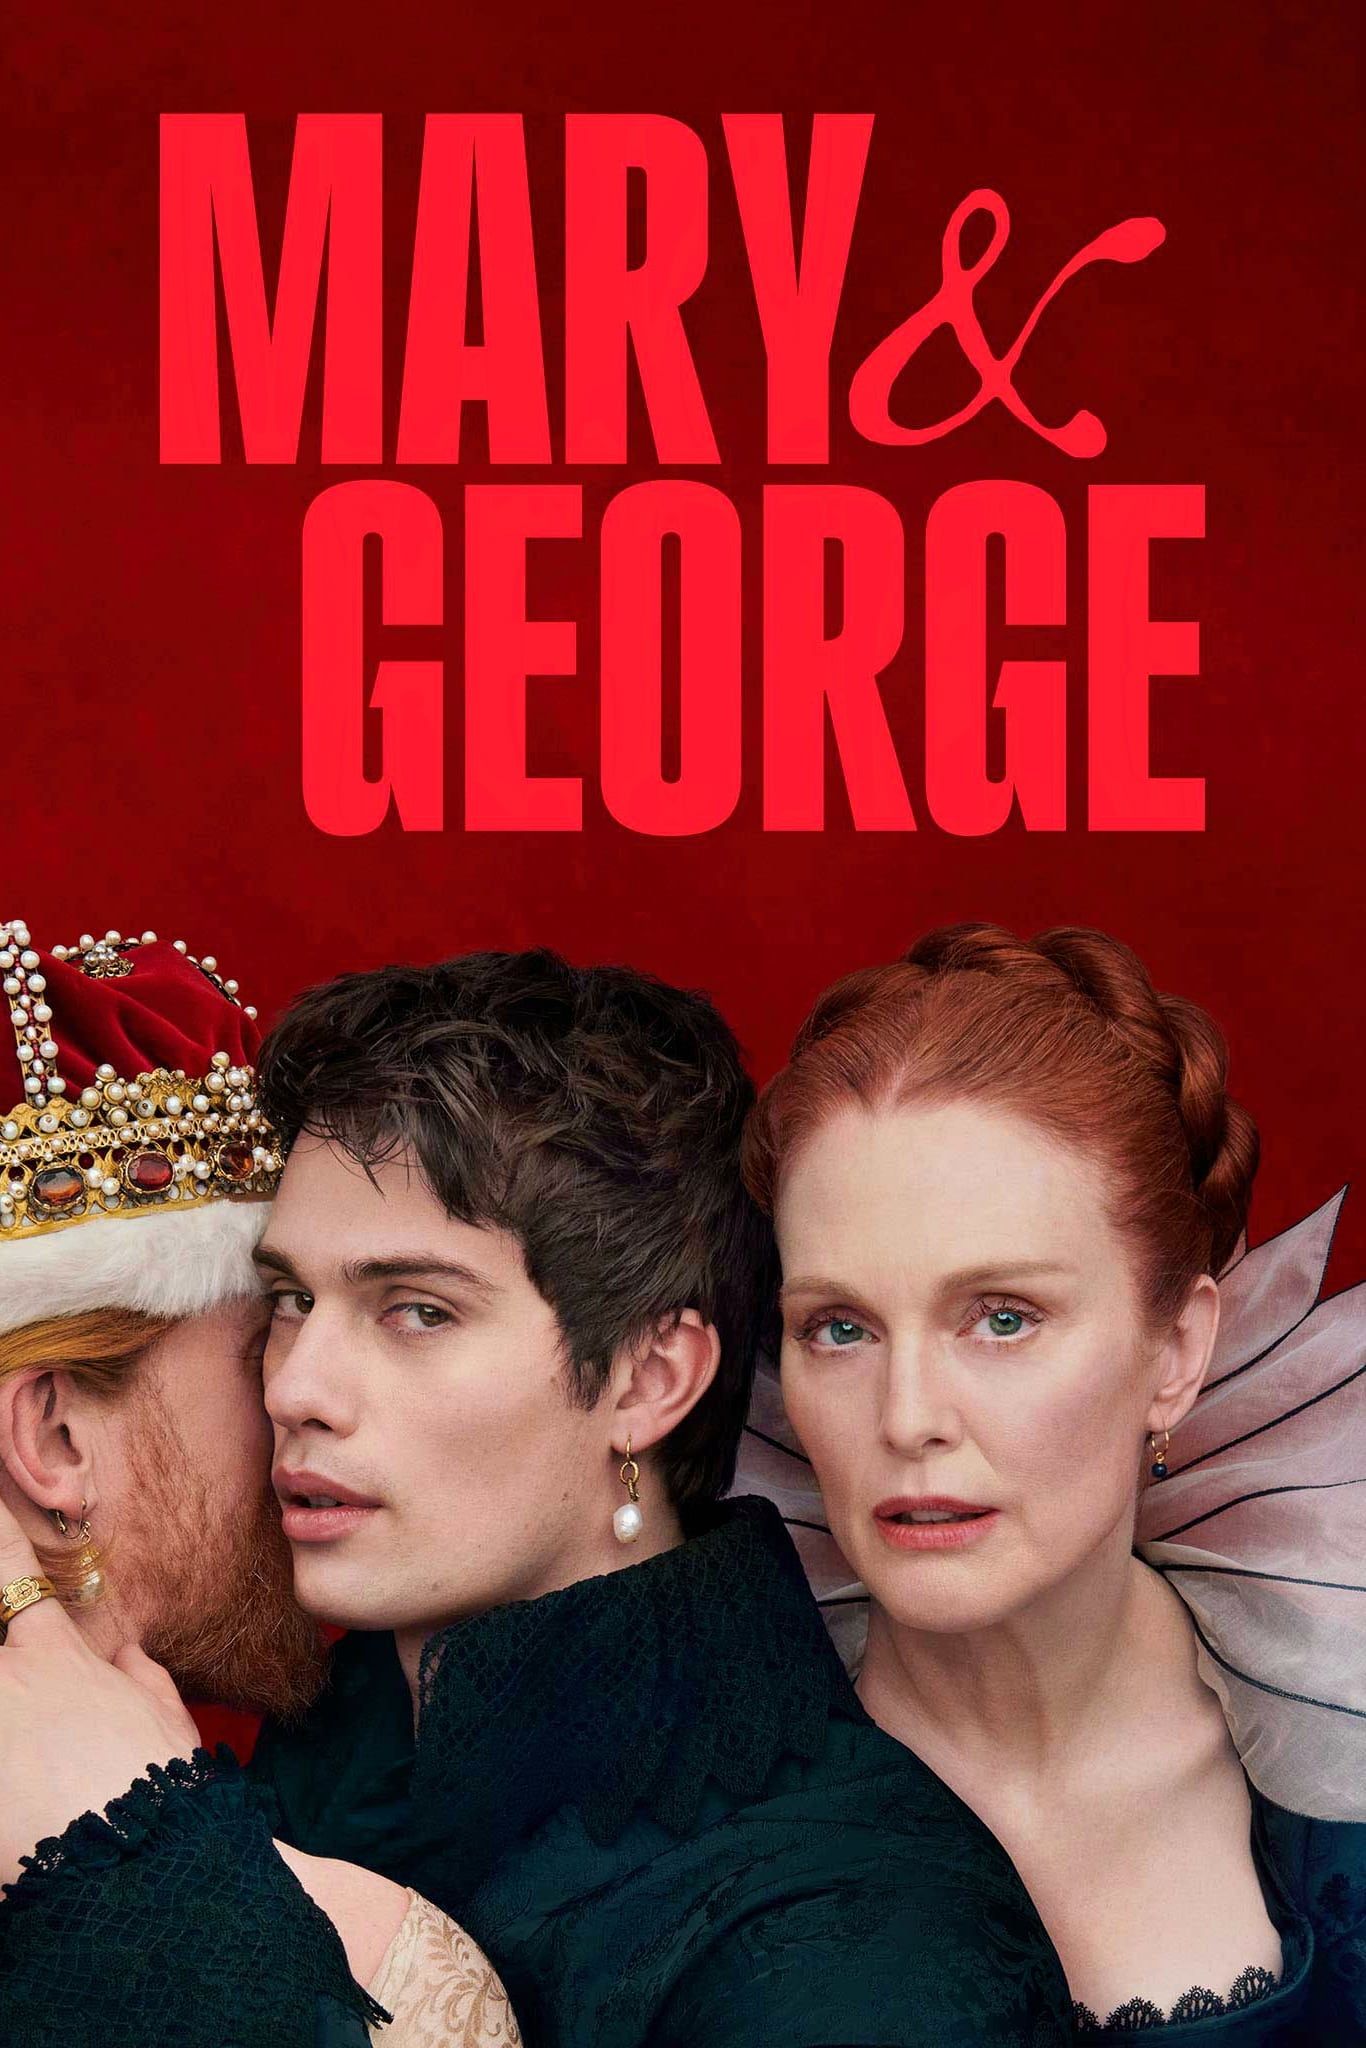 ‘Mary & George’s Tony Curran Loved Tapping into the Darker, Sexual Side of Being King